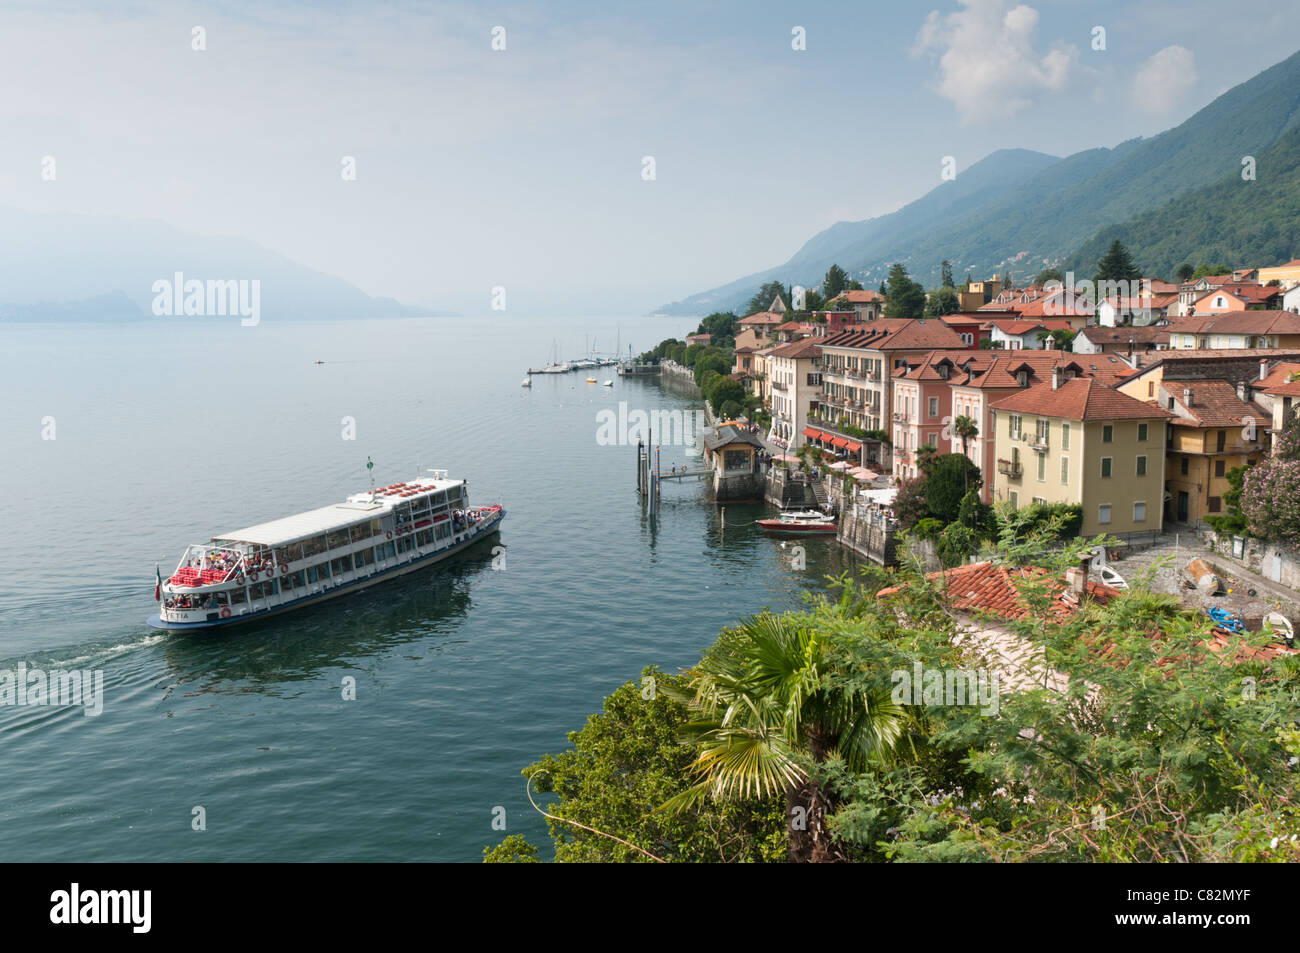 Passenger ferry approaching Cannero Riviera, Lake Maggiore, Italy. Stock Photo